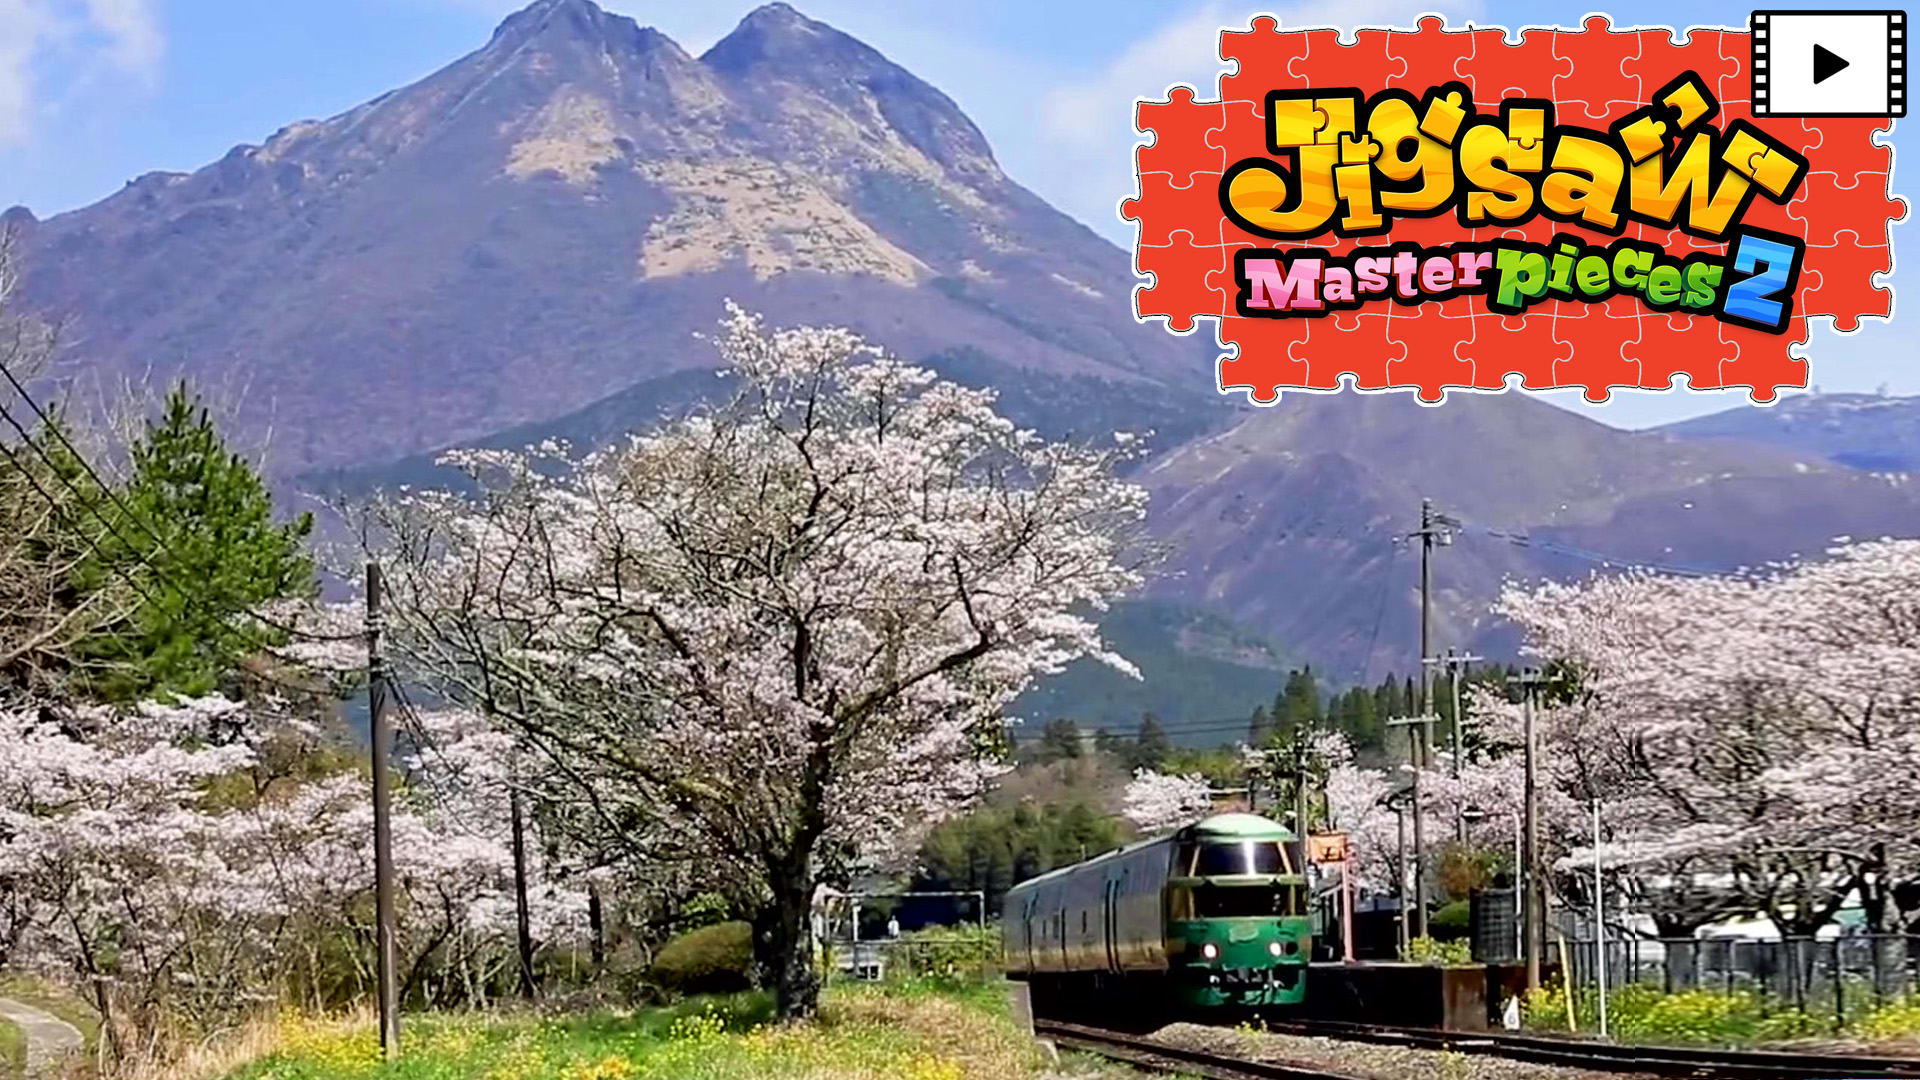 [Moving] Unexplored Train in Japan